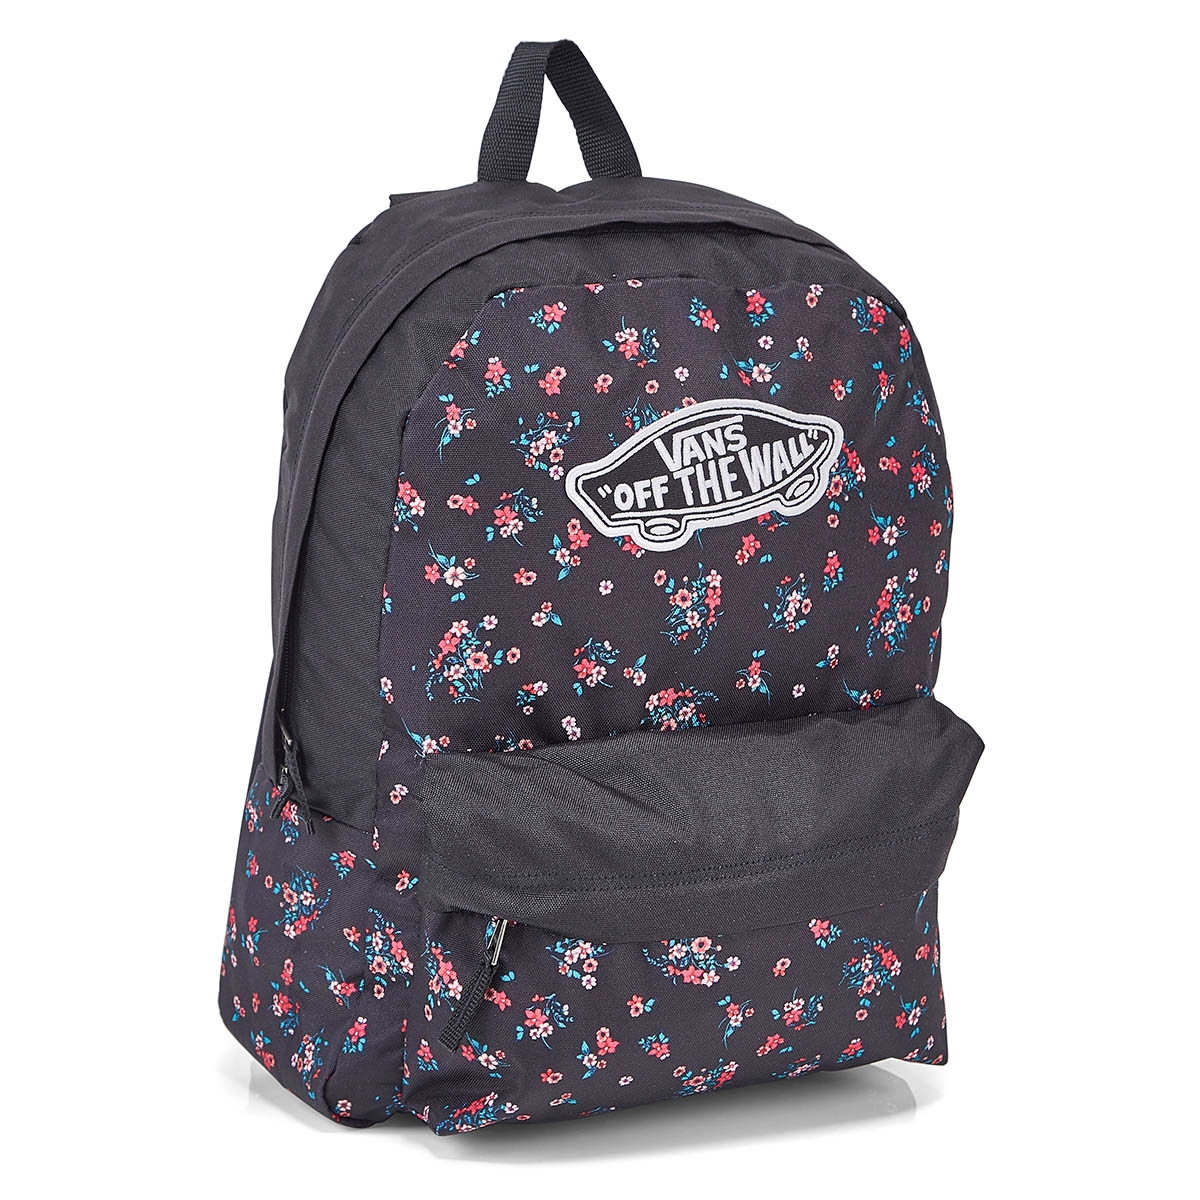 Women's Realm Beauty BackPacks - Floral Black